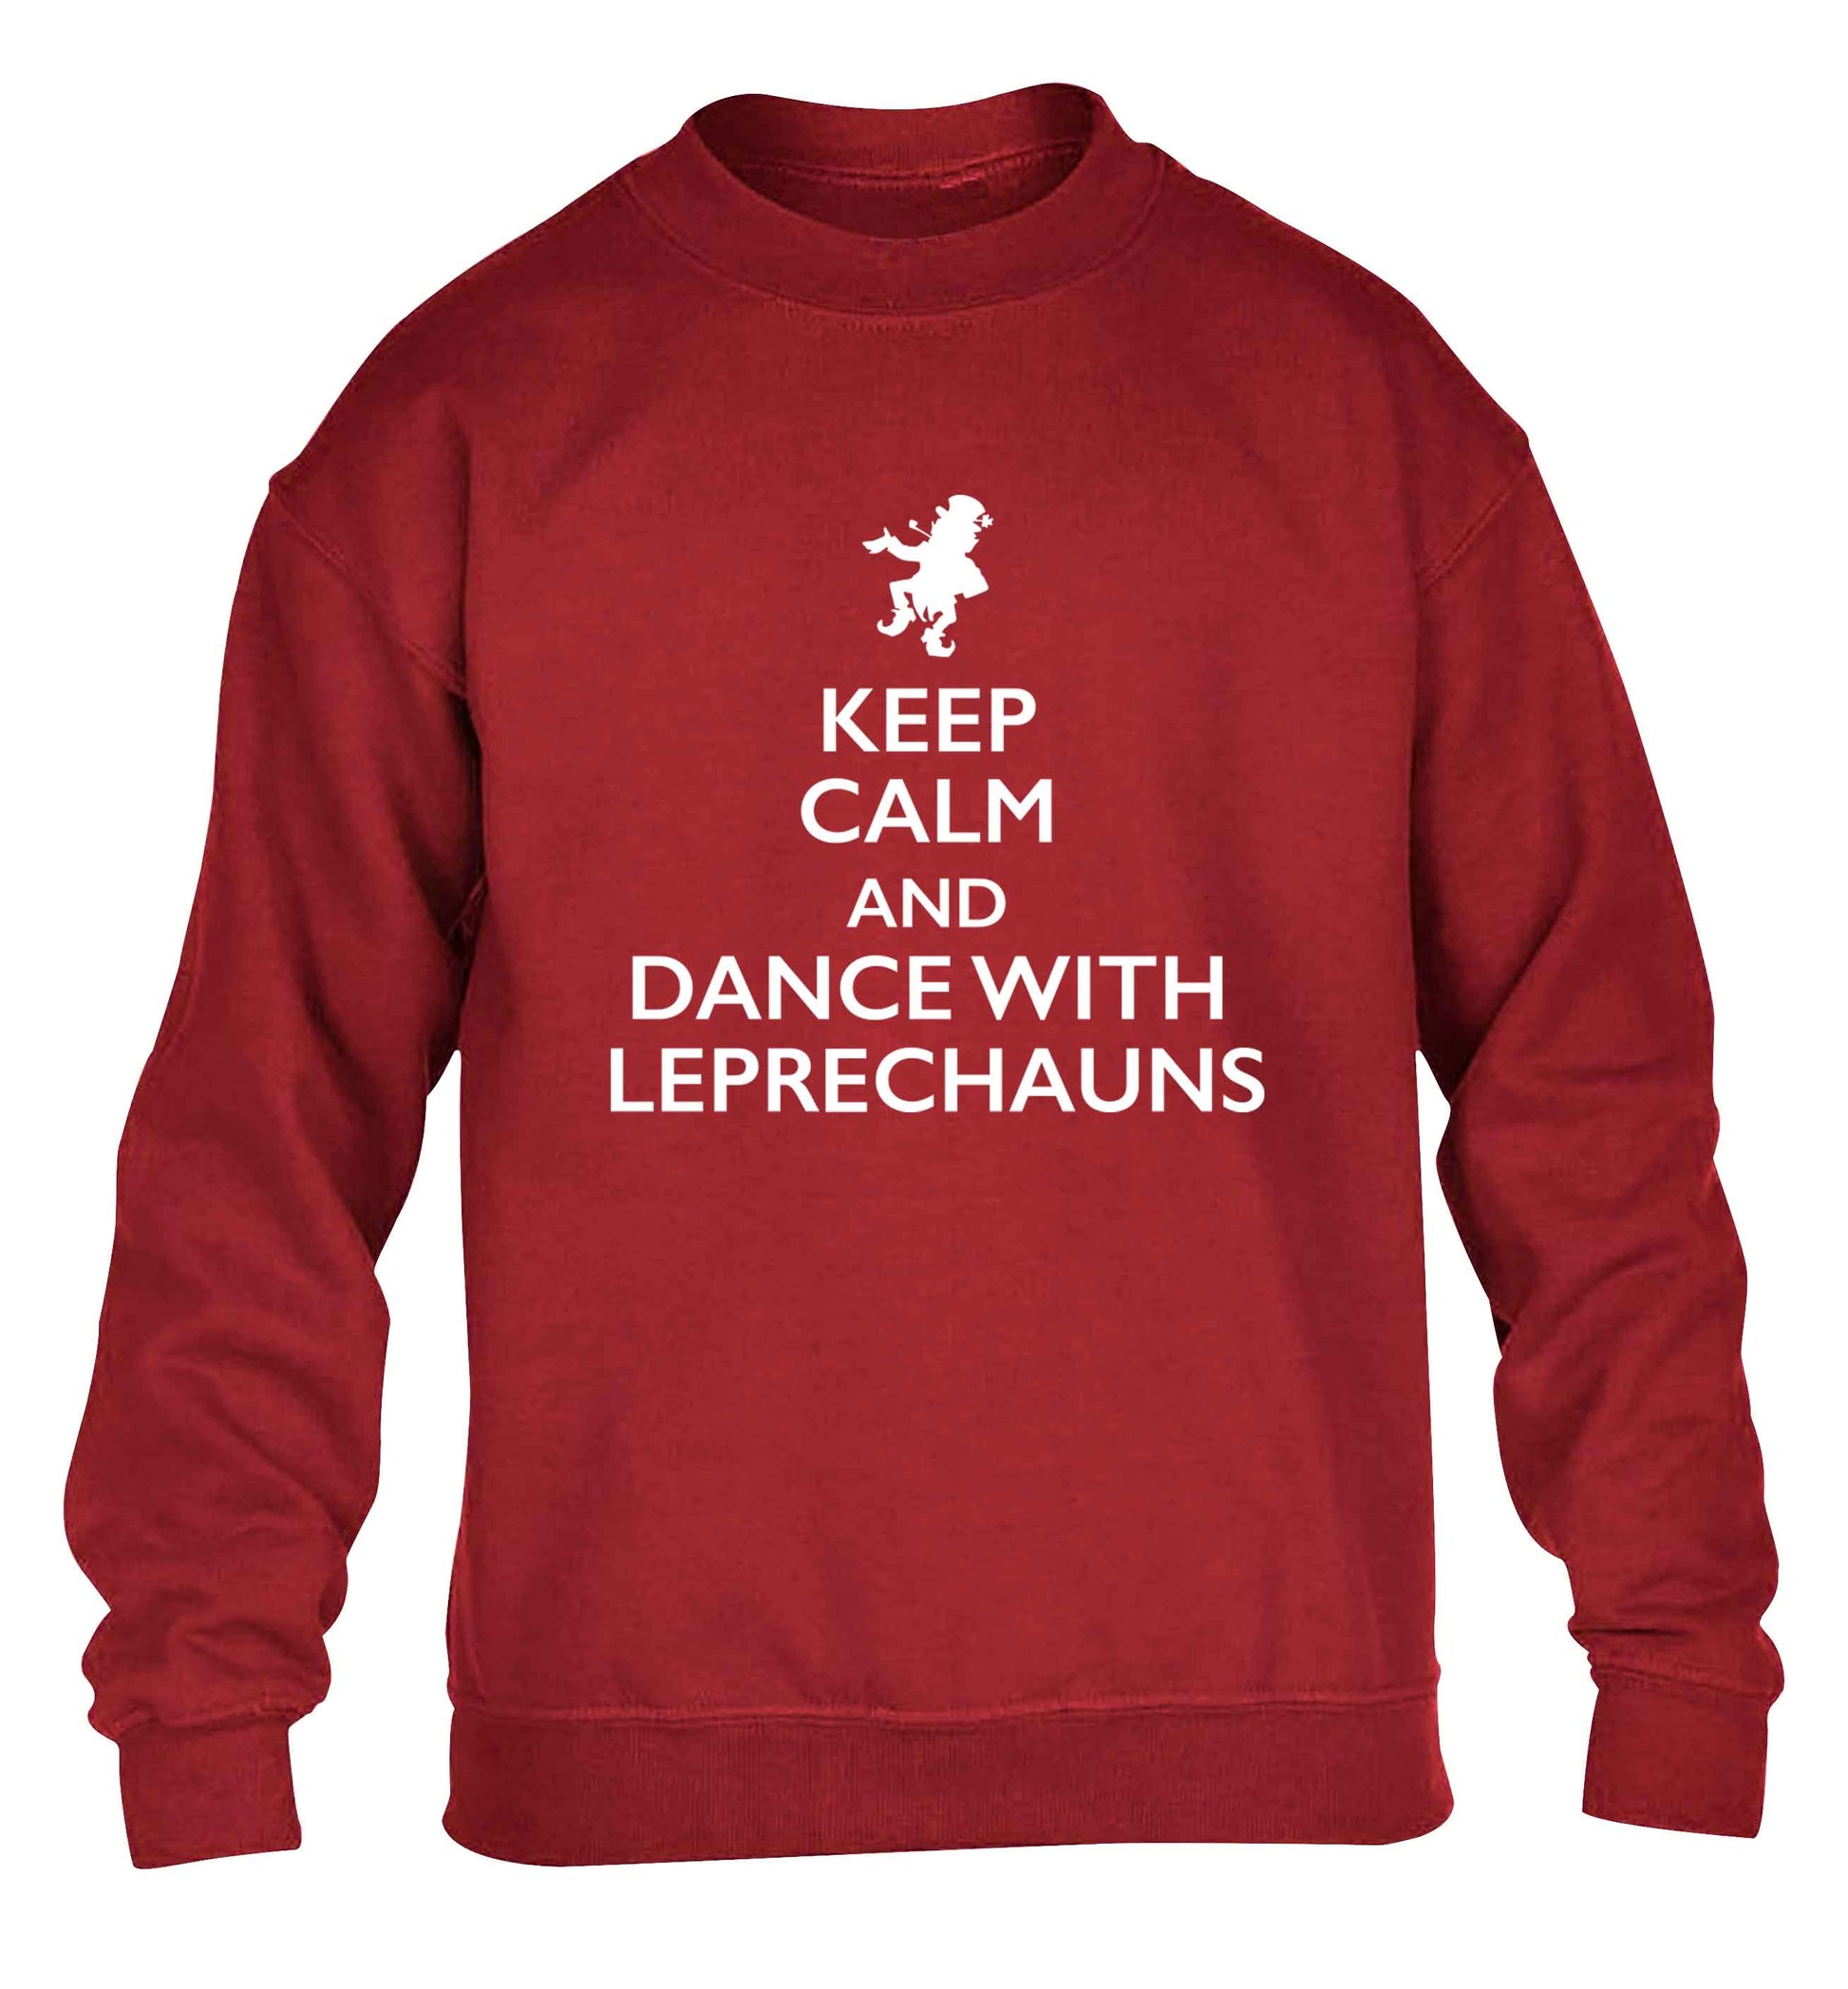 Keep calm and dance with leprechauns children's grey sweater 12-13 Years